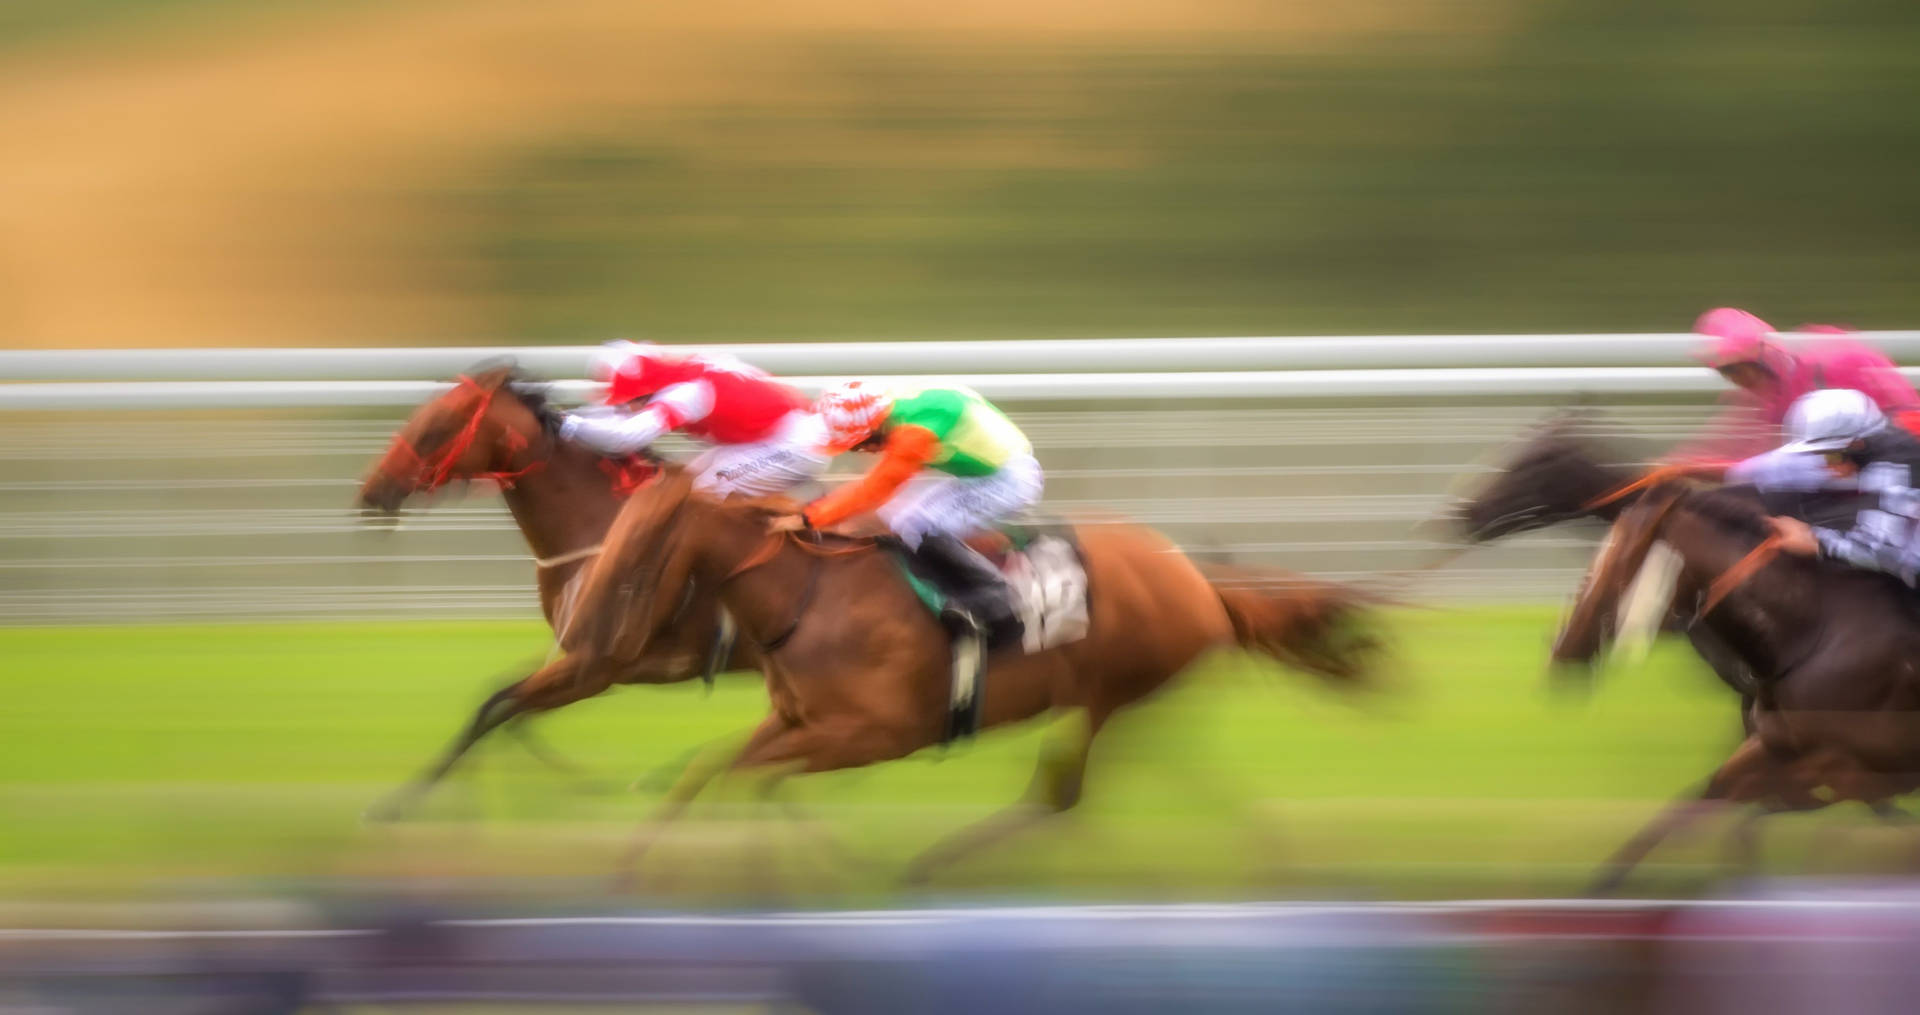 "Adrenaline Rush at the Horse Racing Competition" Wallpaper